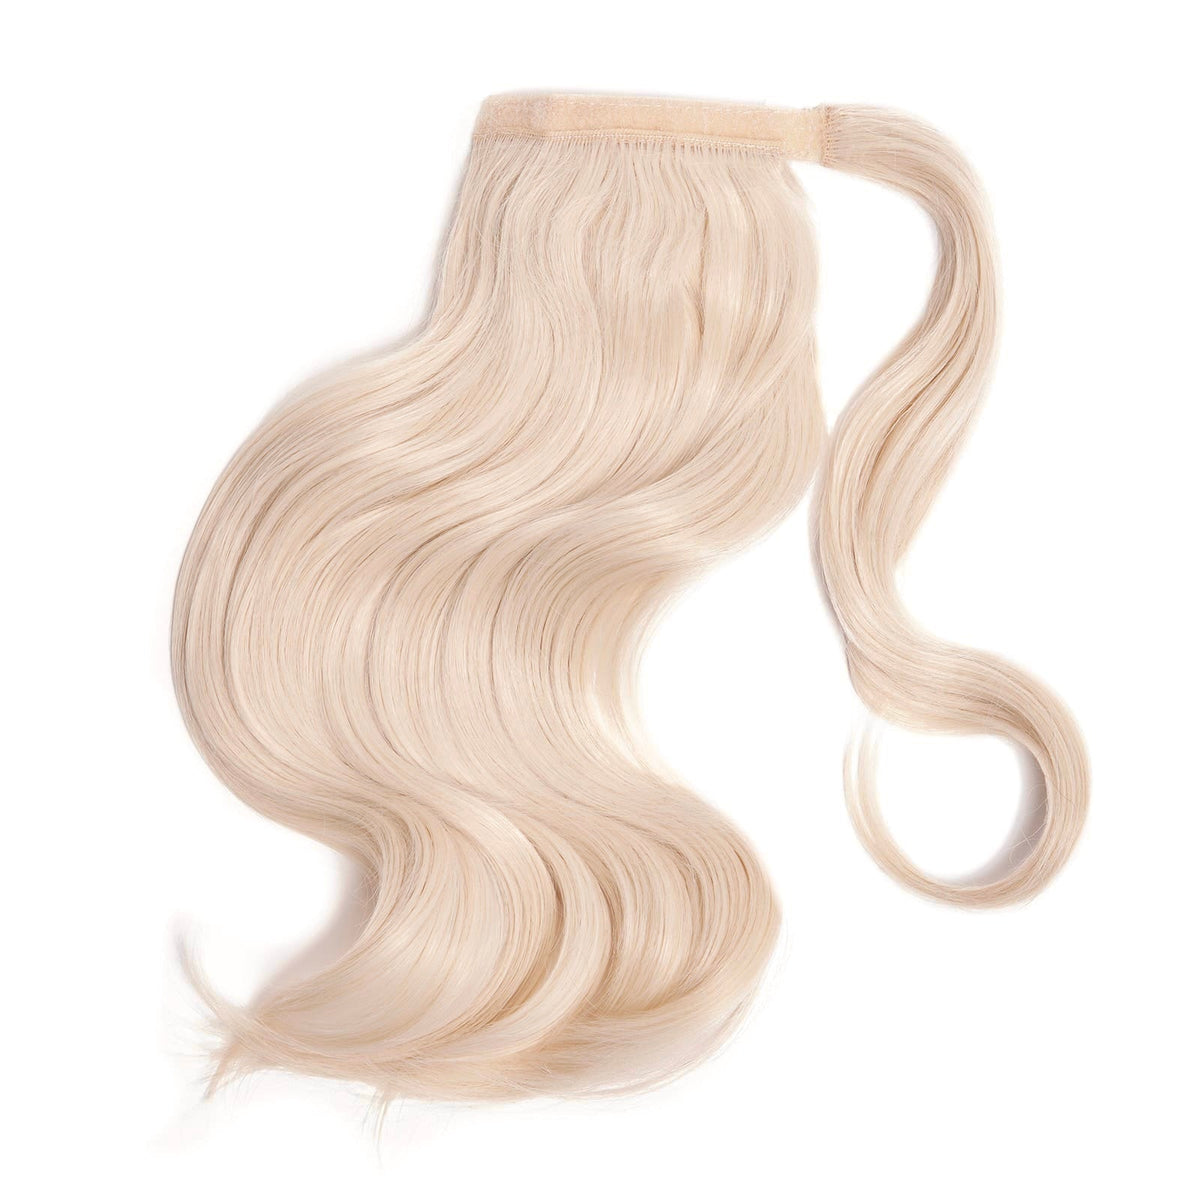 12" Ponytail Hair Extension - PA Hair Extensions